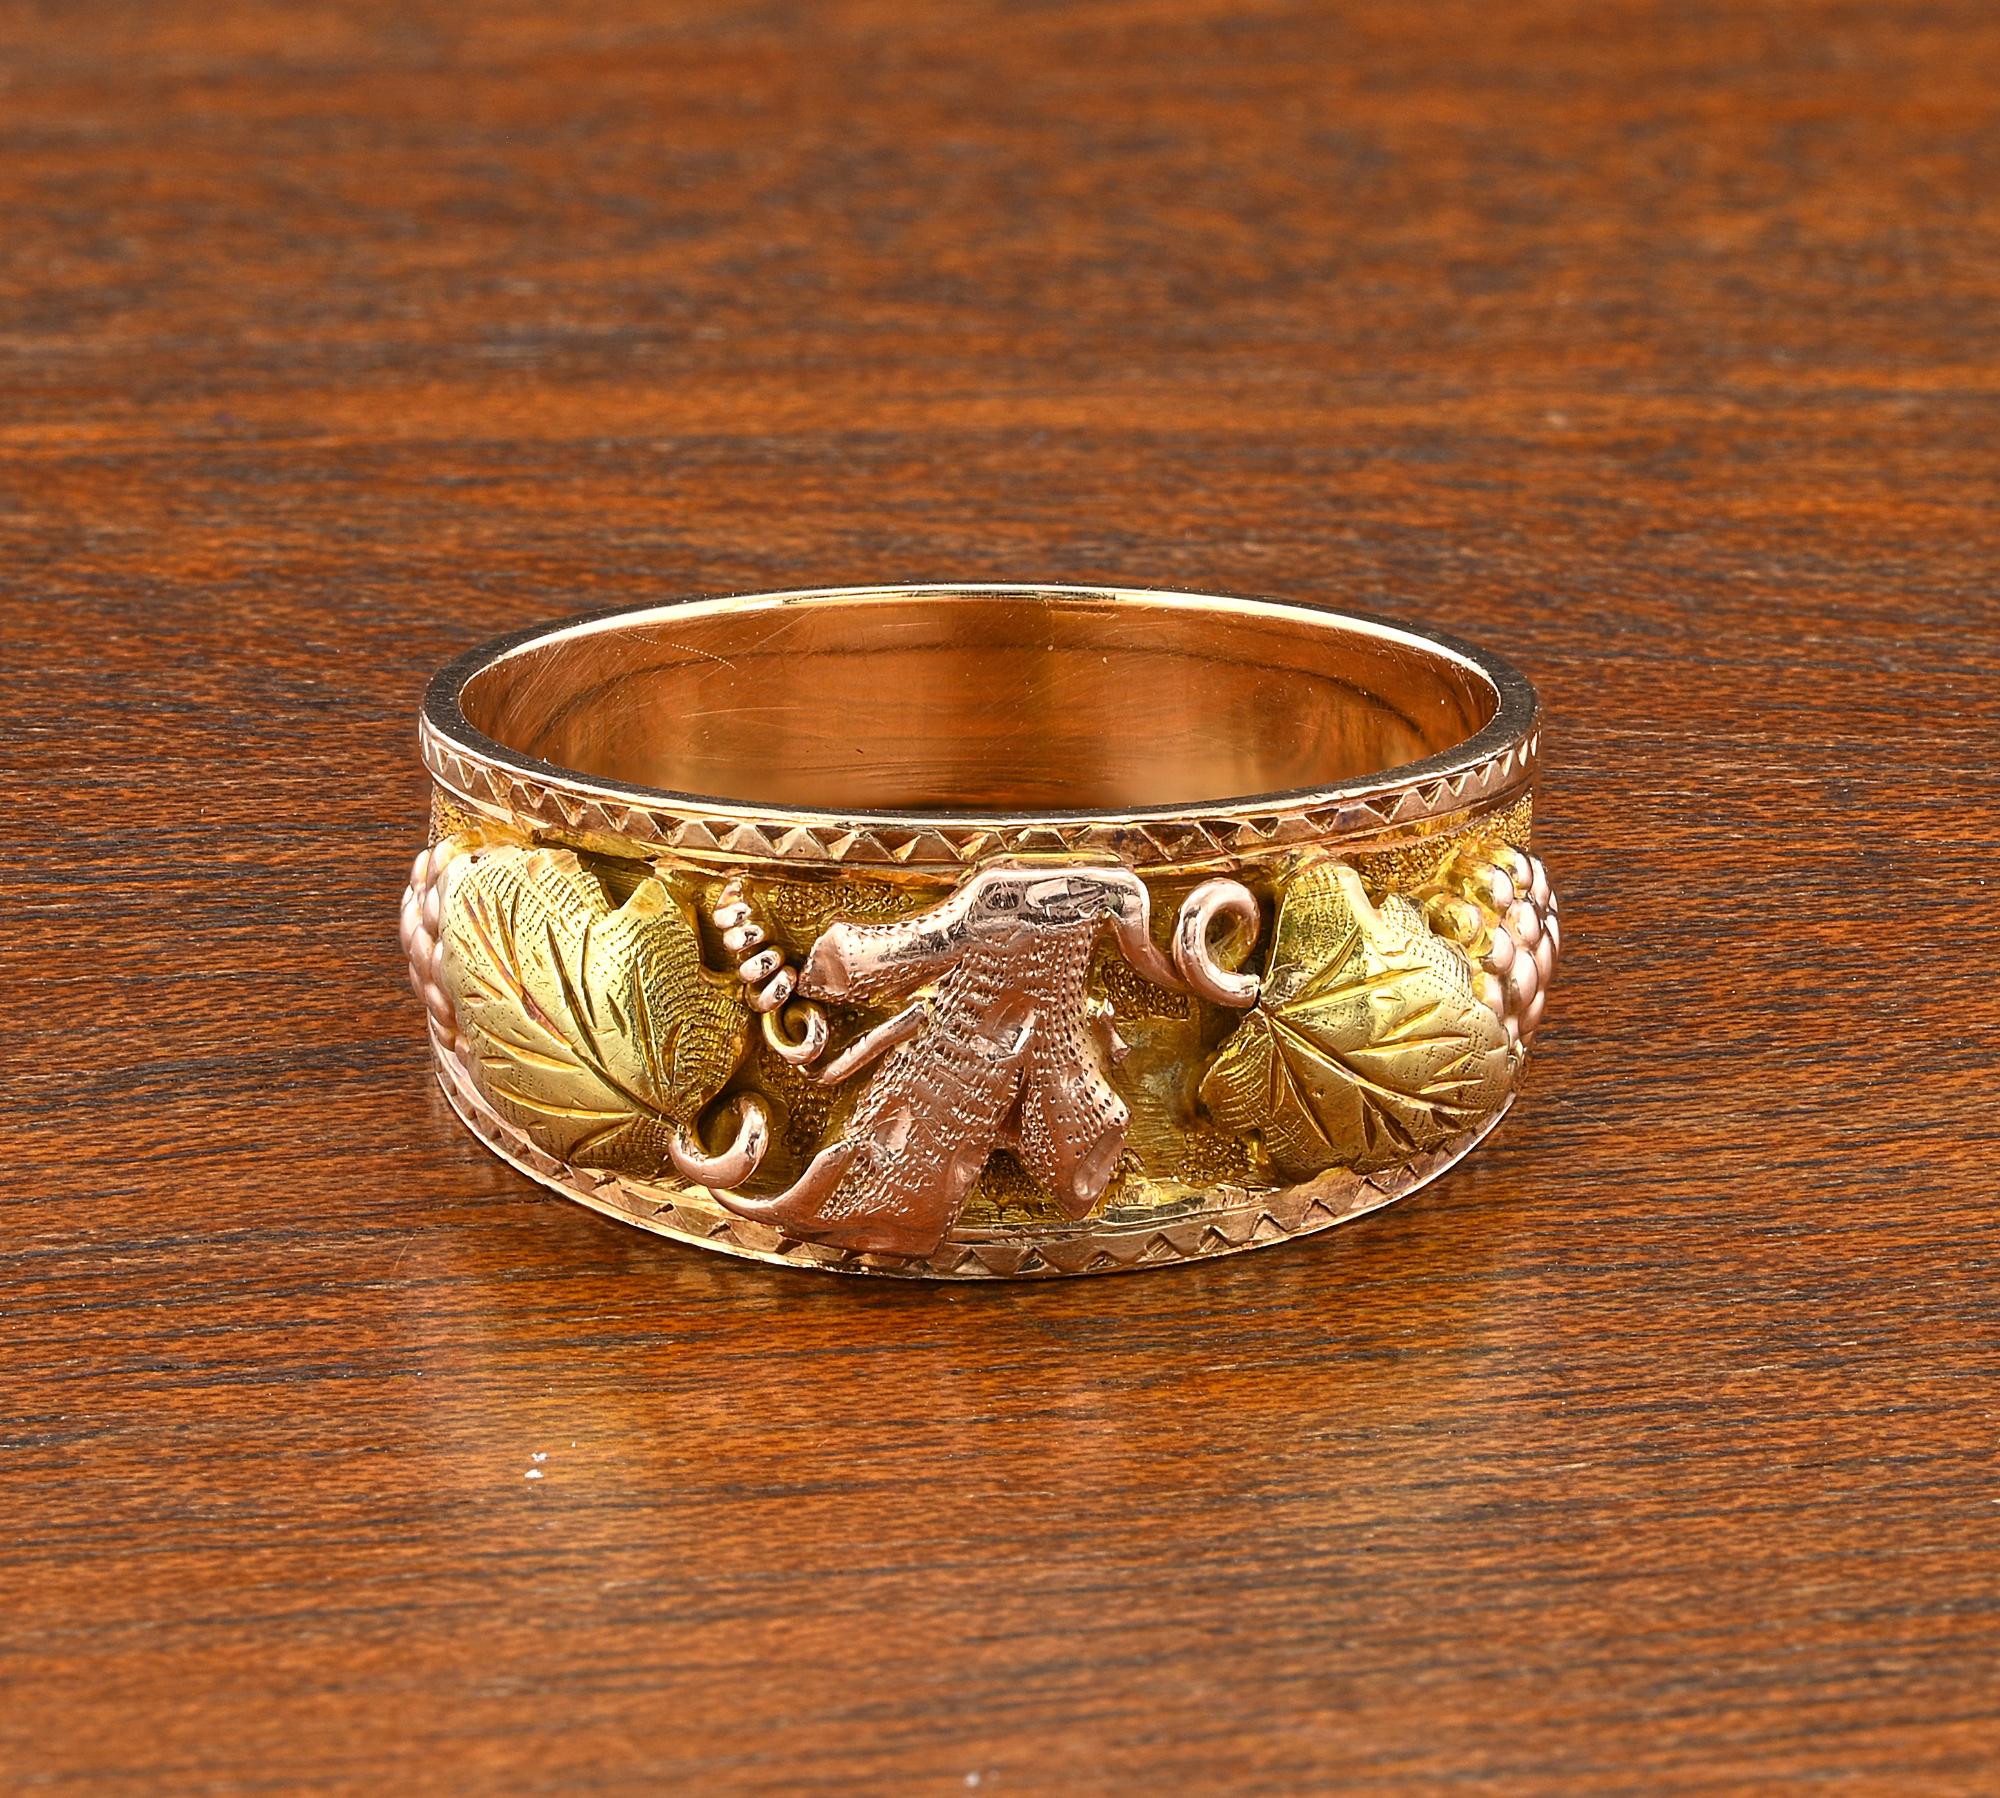 This beautiful and quite unique antique band ring is Art Nouveau period 1905 circa
Artful hand crafted of solid 14 Kt rose and yellow gold
Front side skillfully 3D hand carved featuring grape shoots and sinuous ivy leaf with gorgeous frame detailing